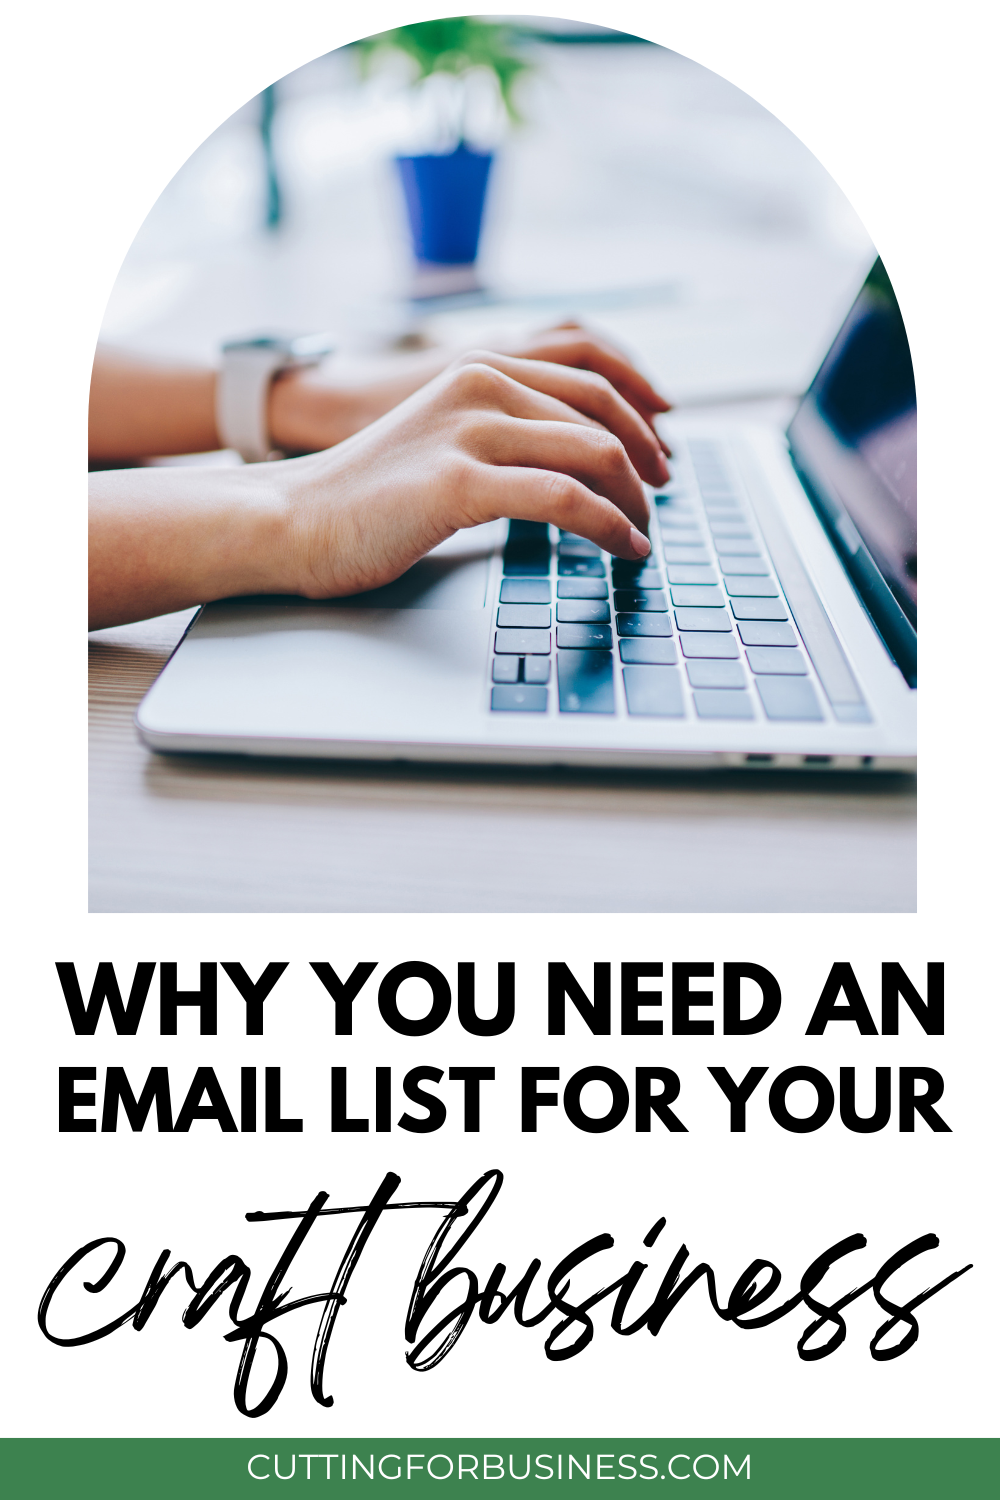 Why You Need an Email List for Your Craft Business - cuttingforbusiness.com